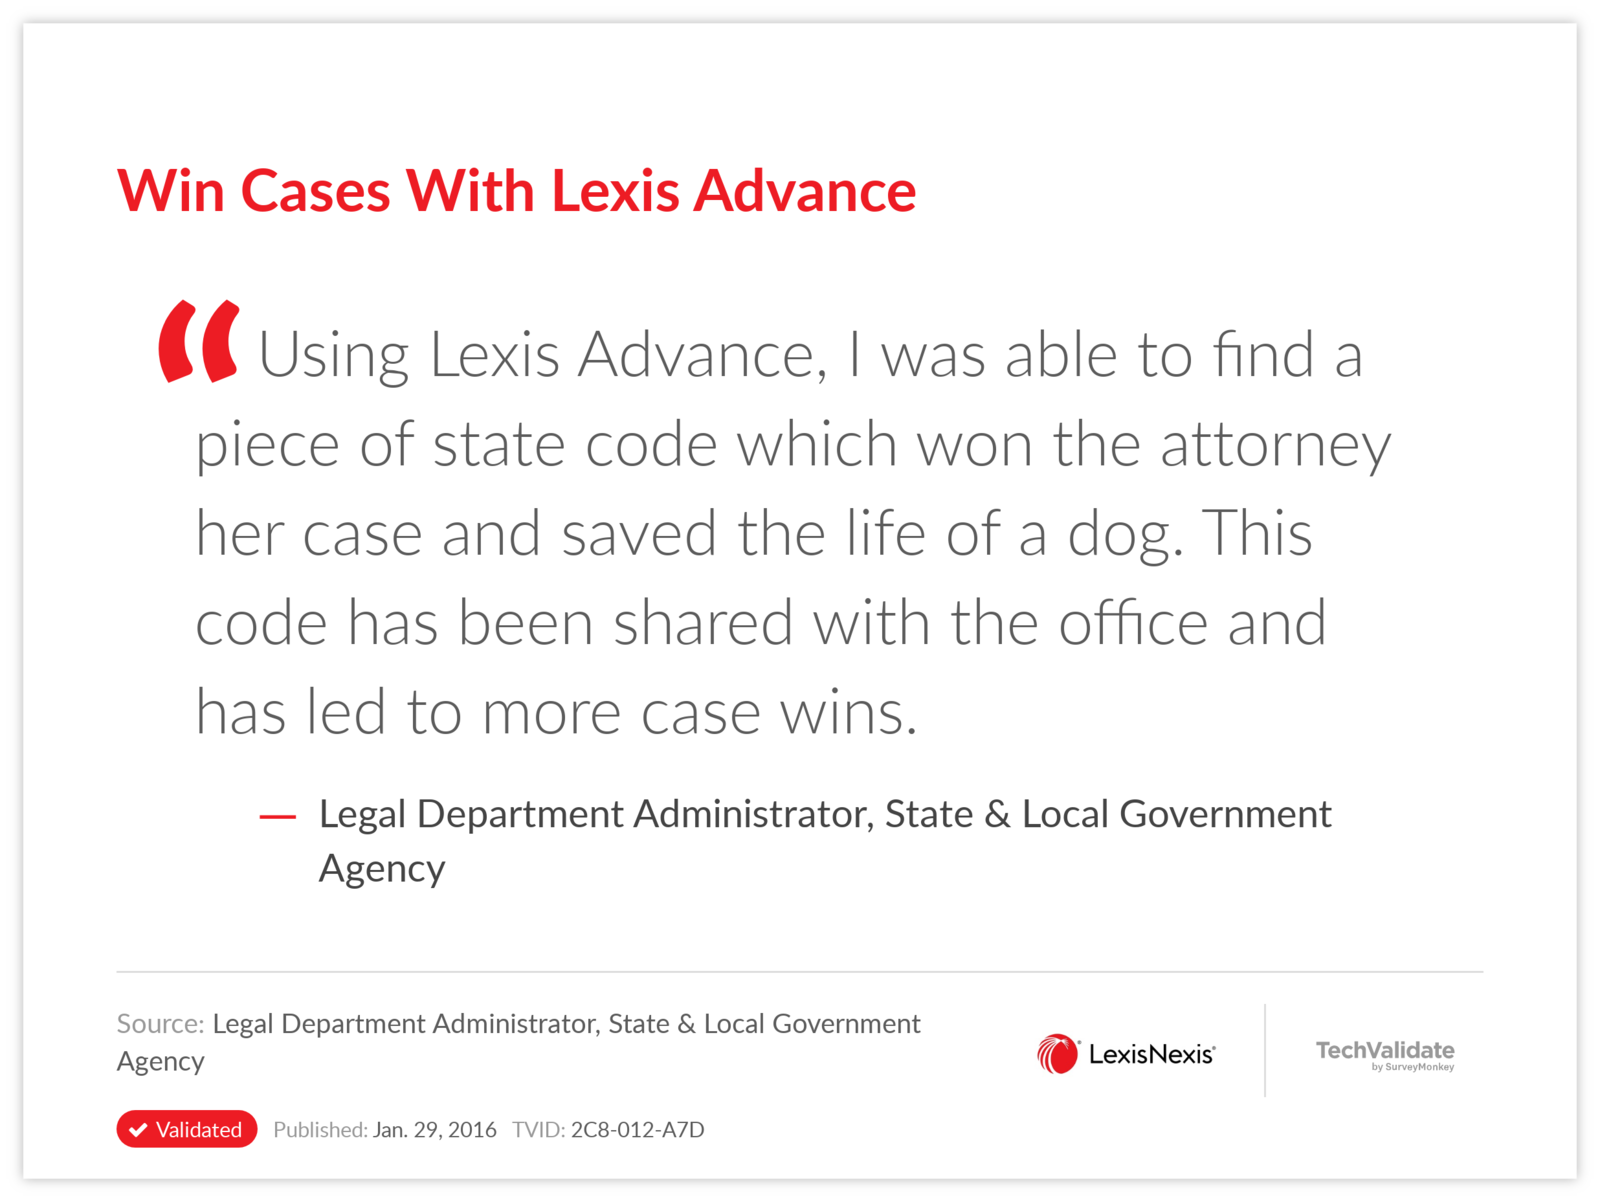 Win Cases With Lexis Advance